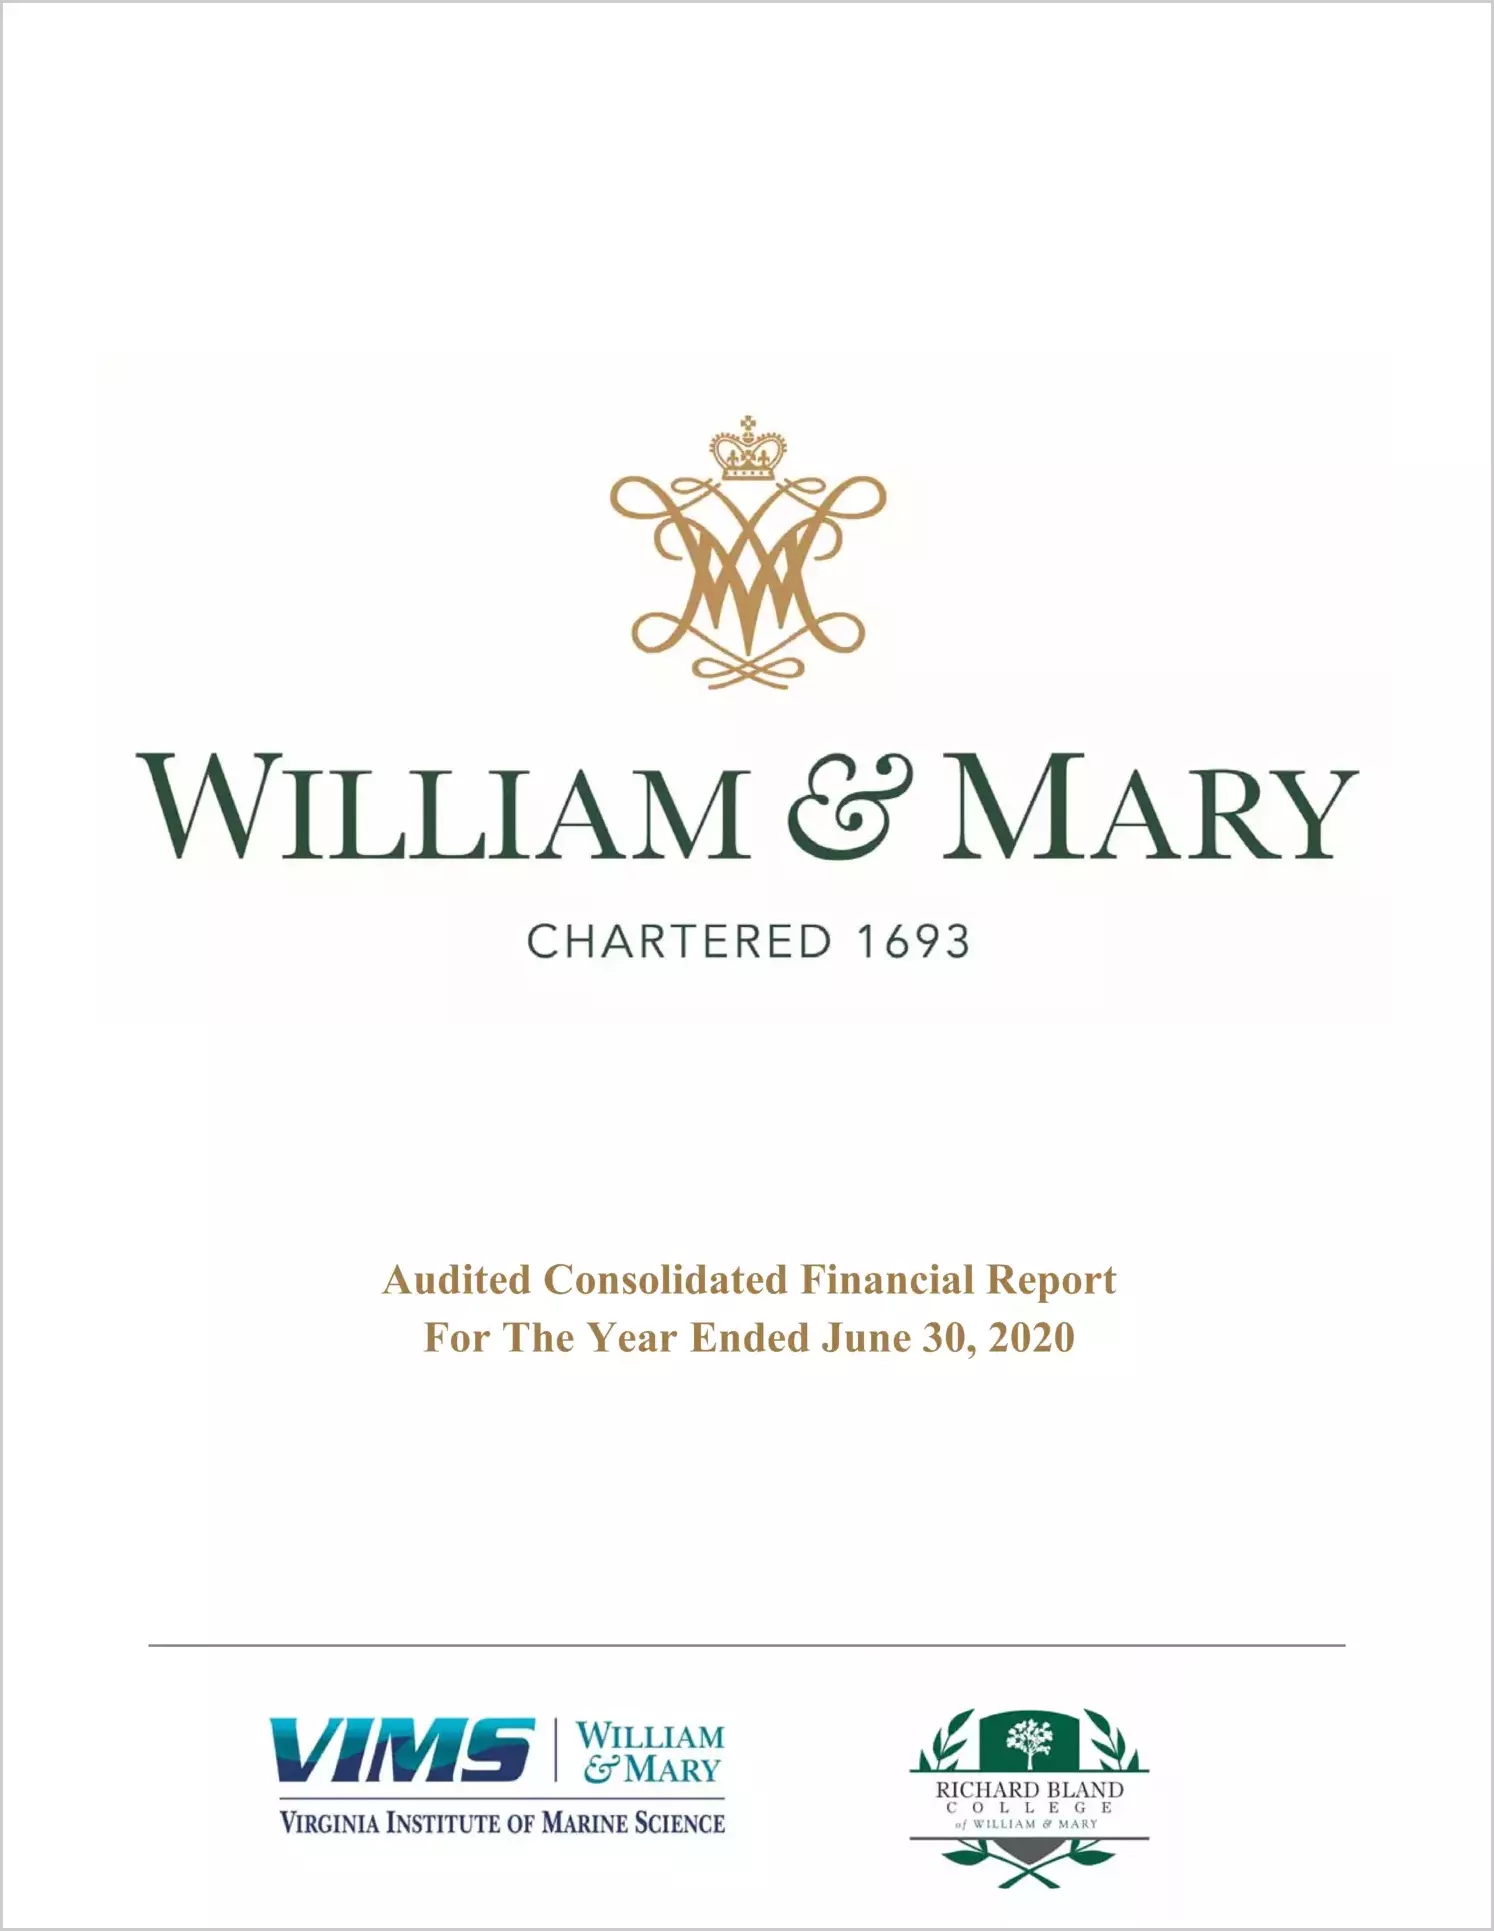 William & Mary, Virginia Institute of Marine Science, and Richard Bland College Financial Statements for the year ended June 30, 2020